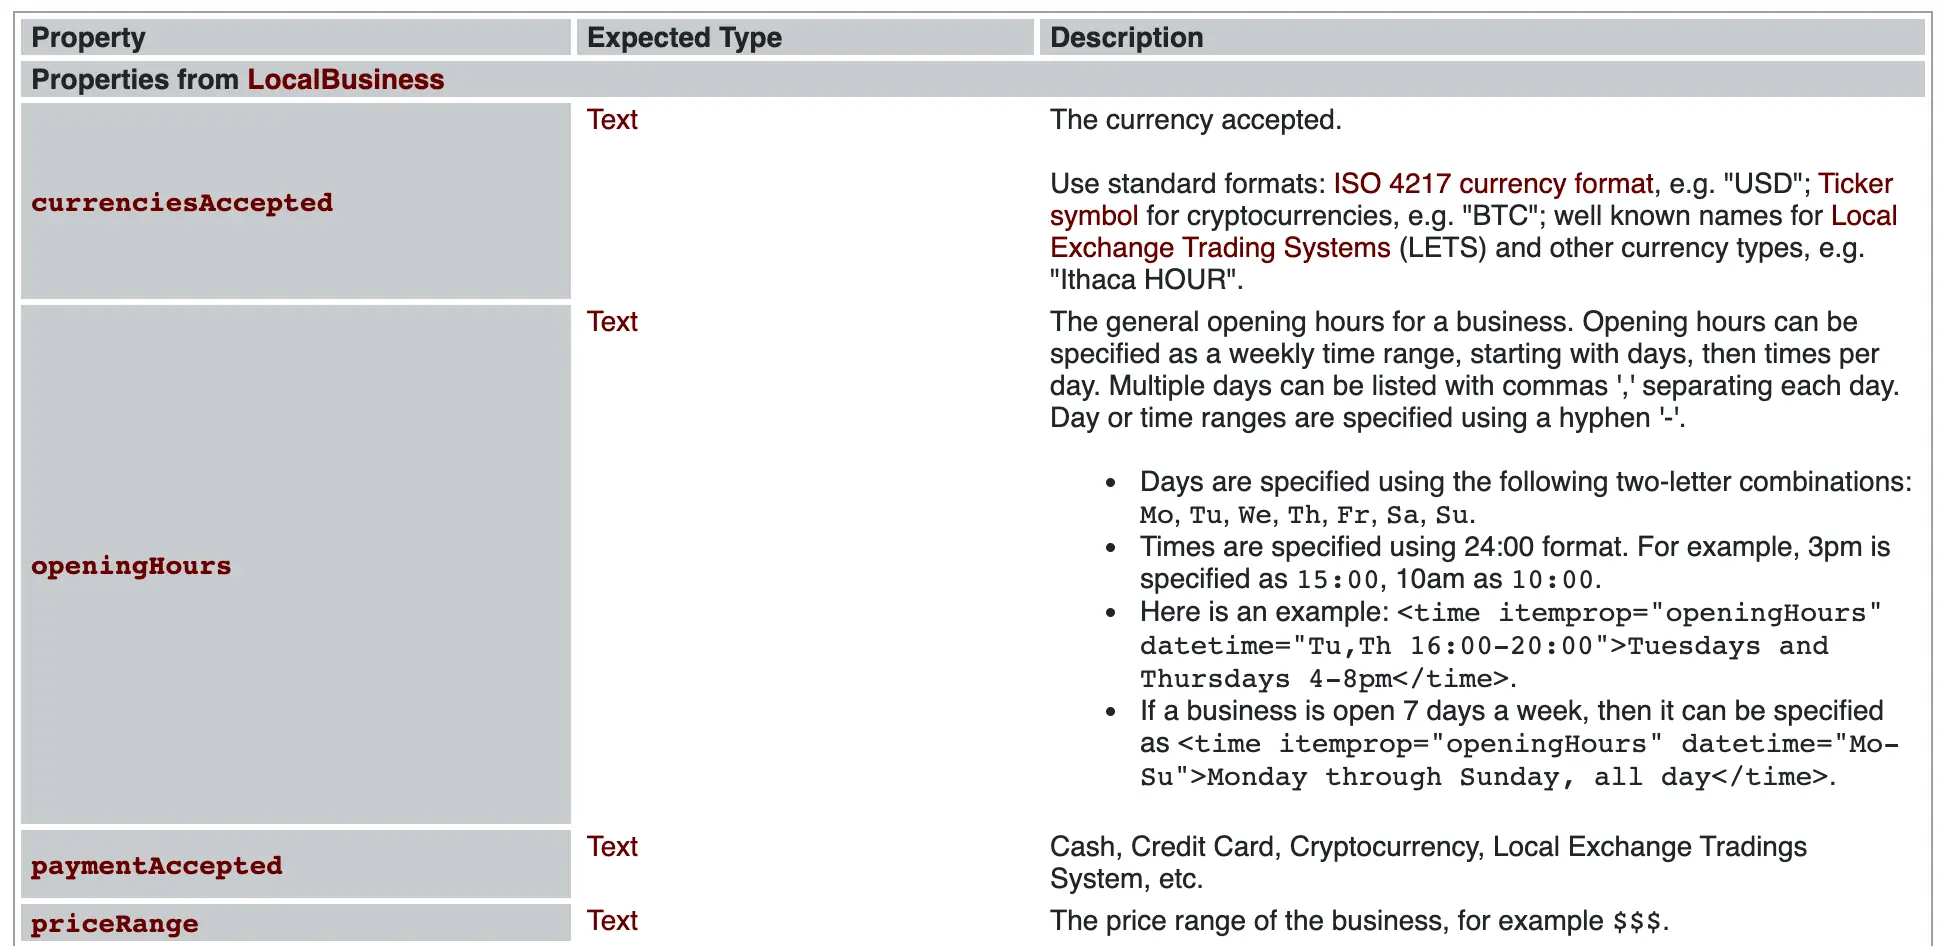 Screenshot of properties for LocalBusiness type on Schema.org with property type and description in a chart, including currenciesAccepted, openingHours, paymentAccepted, and priceRange.